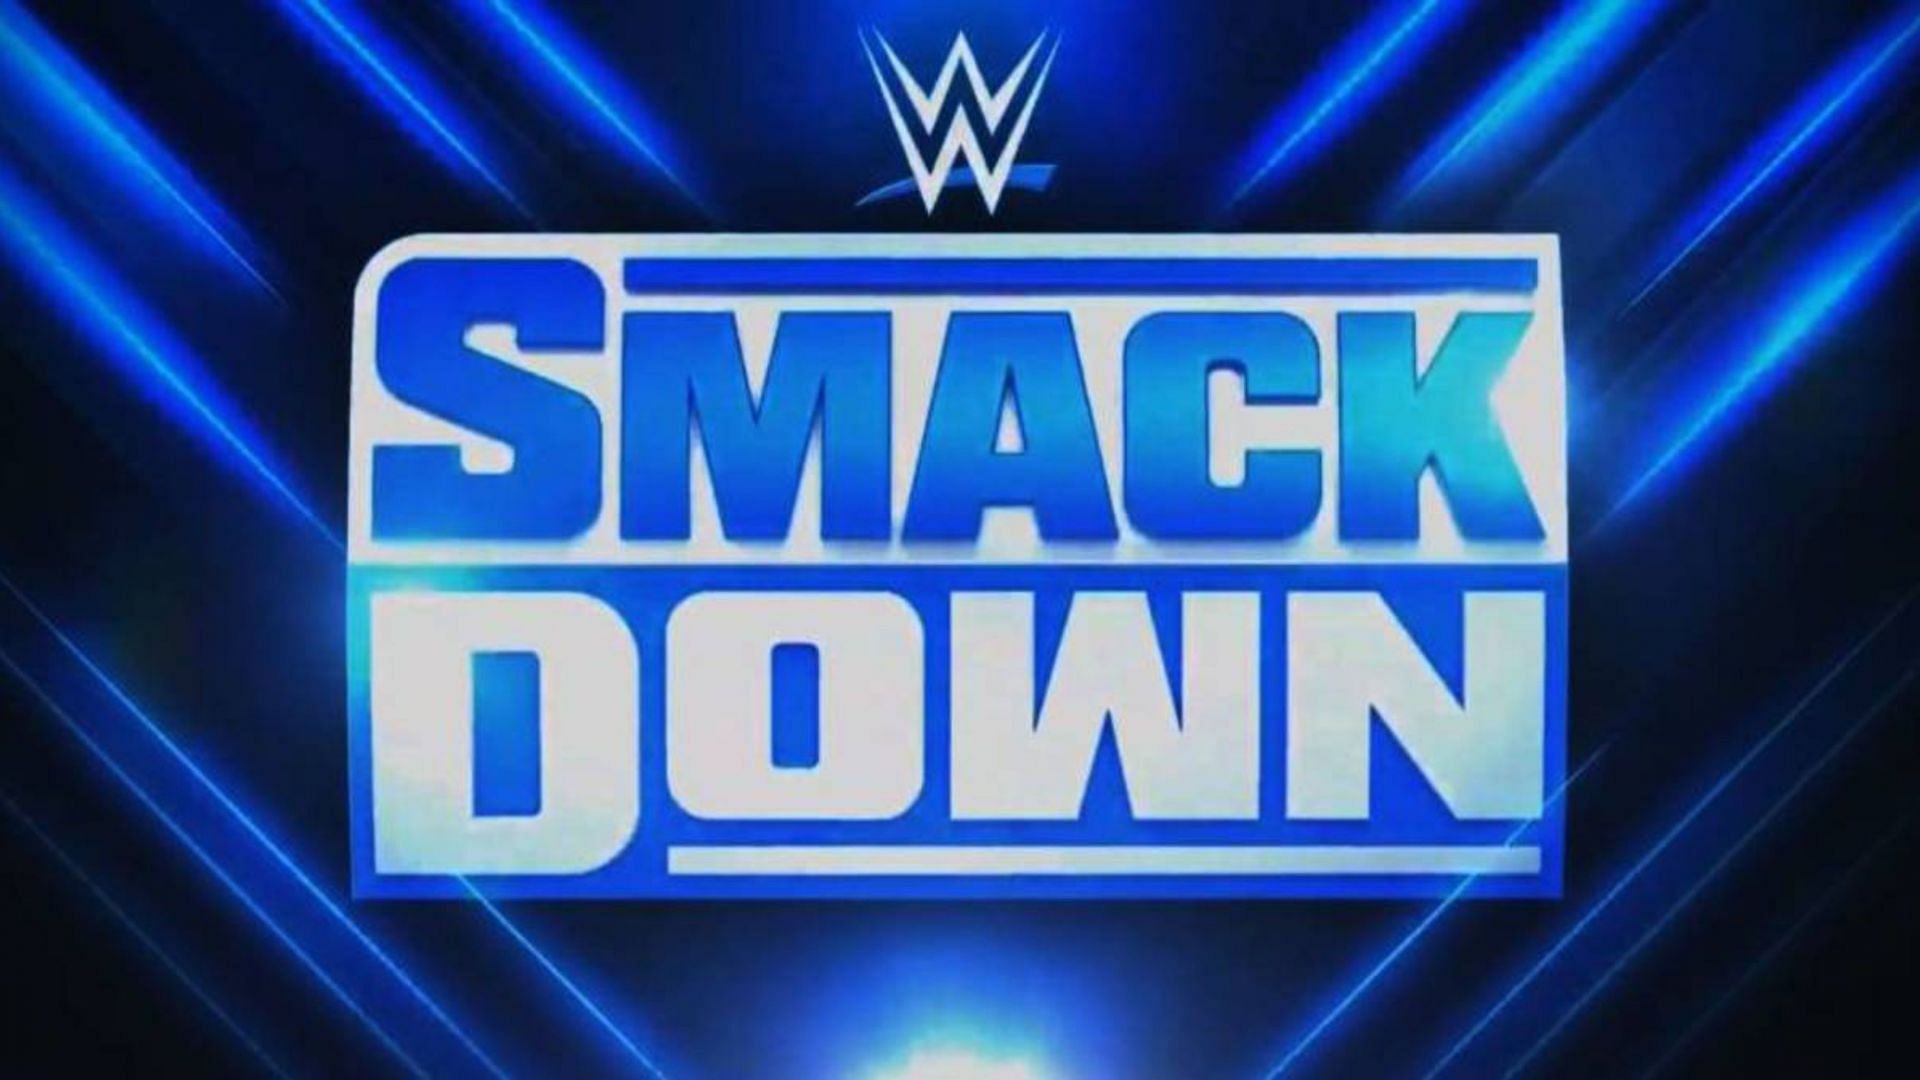 Michin is currently active on WWE SmackDown